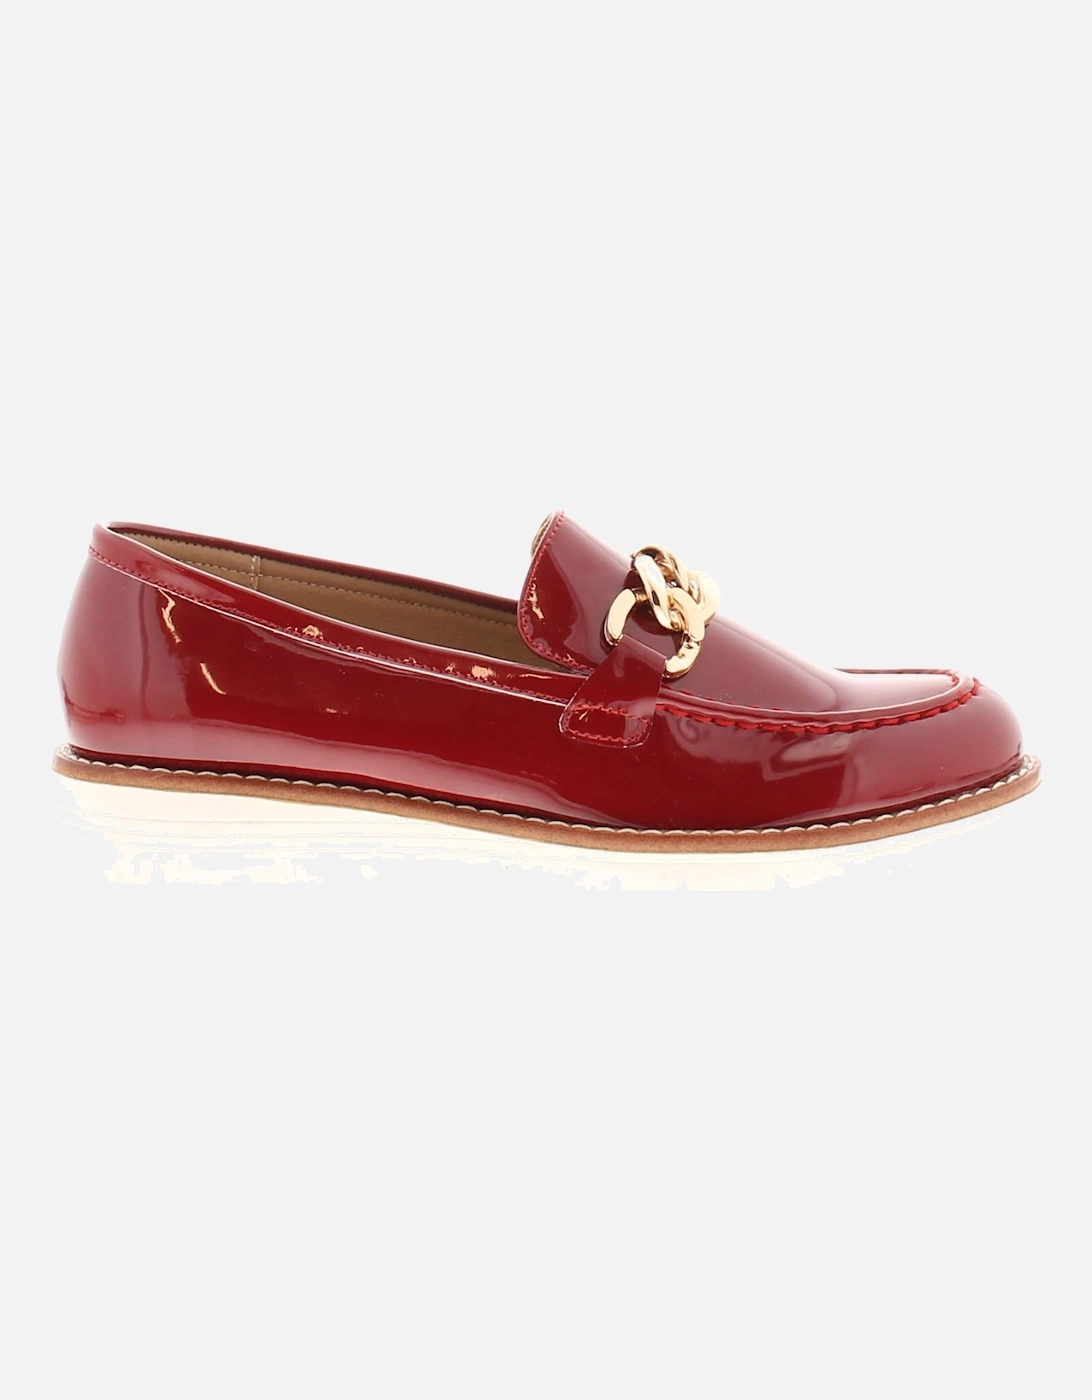 Womens Loafer Shoes Ledge Slip On red UK Size